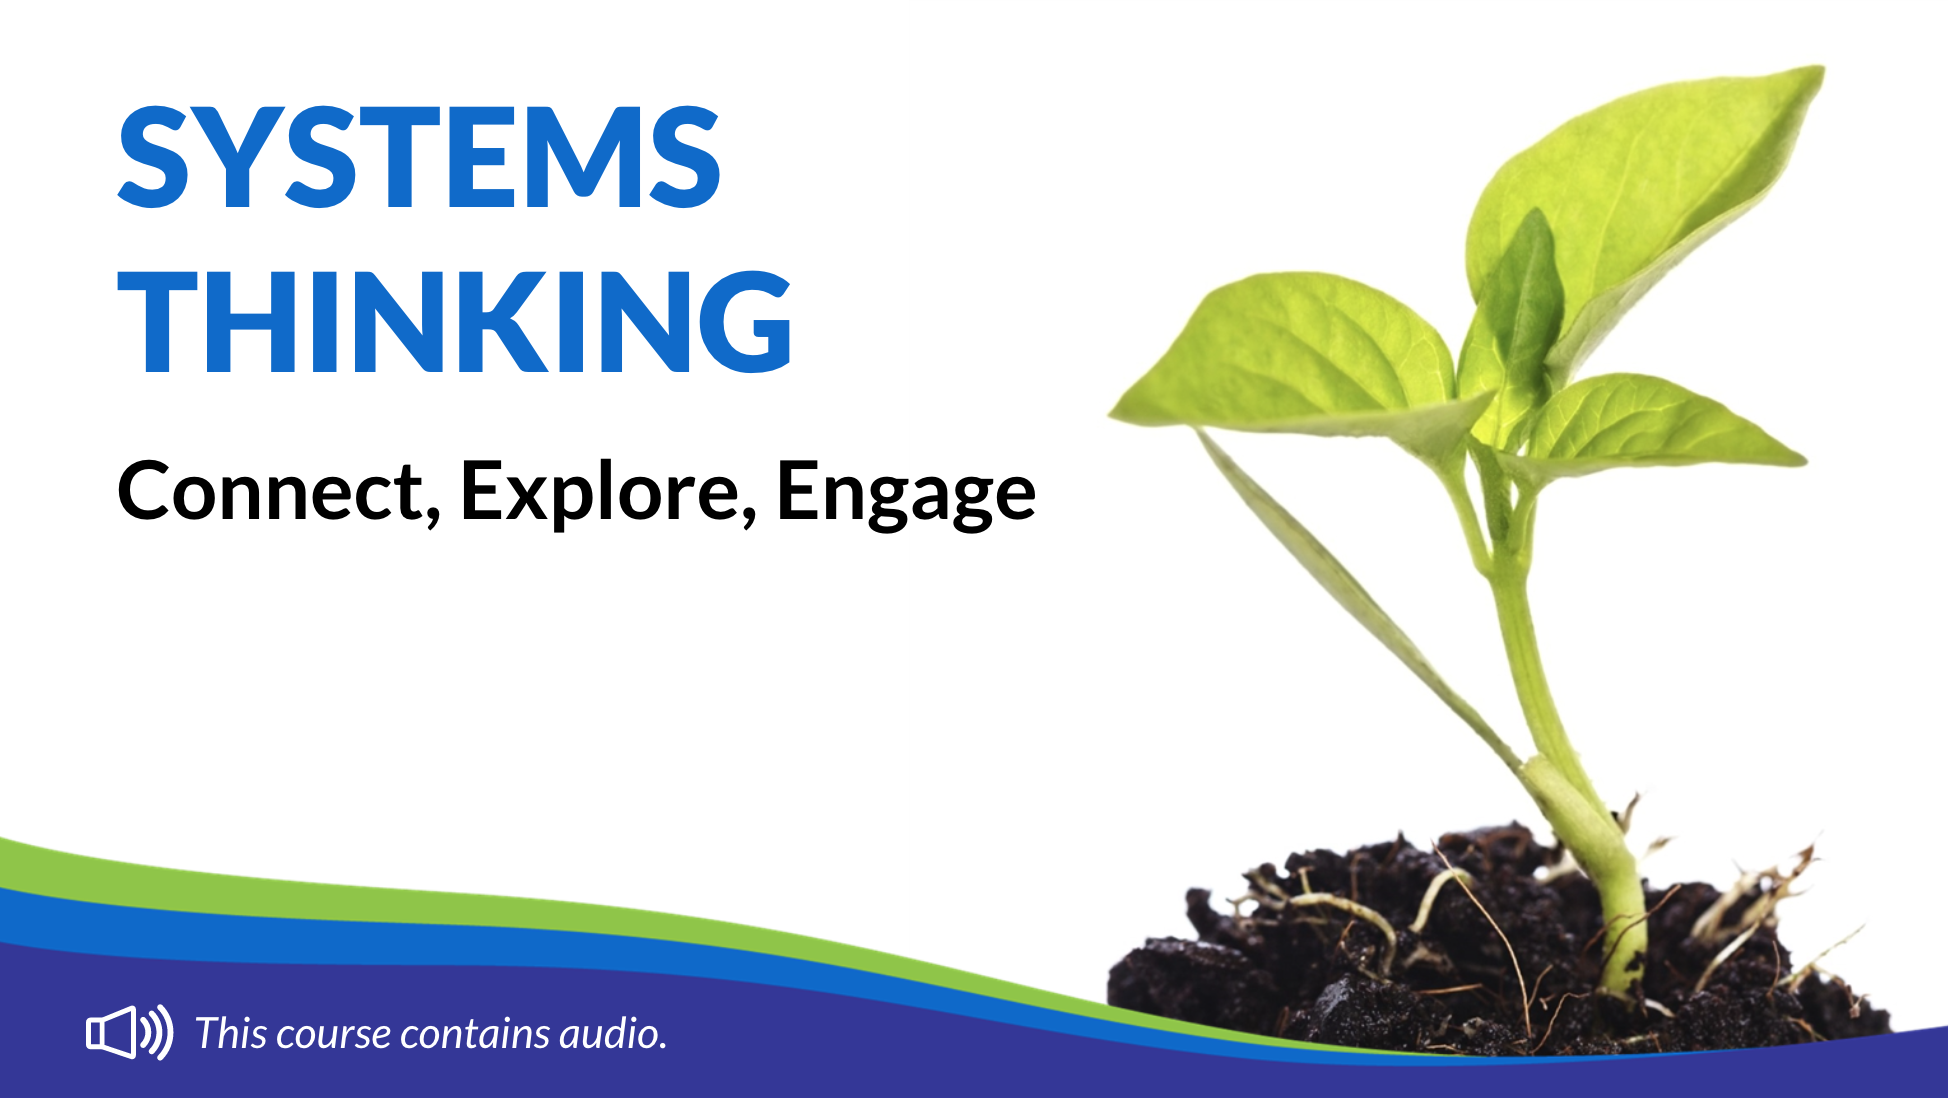 Connect, Explore, Engage with Systems Thinking